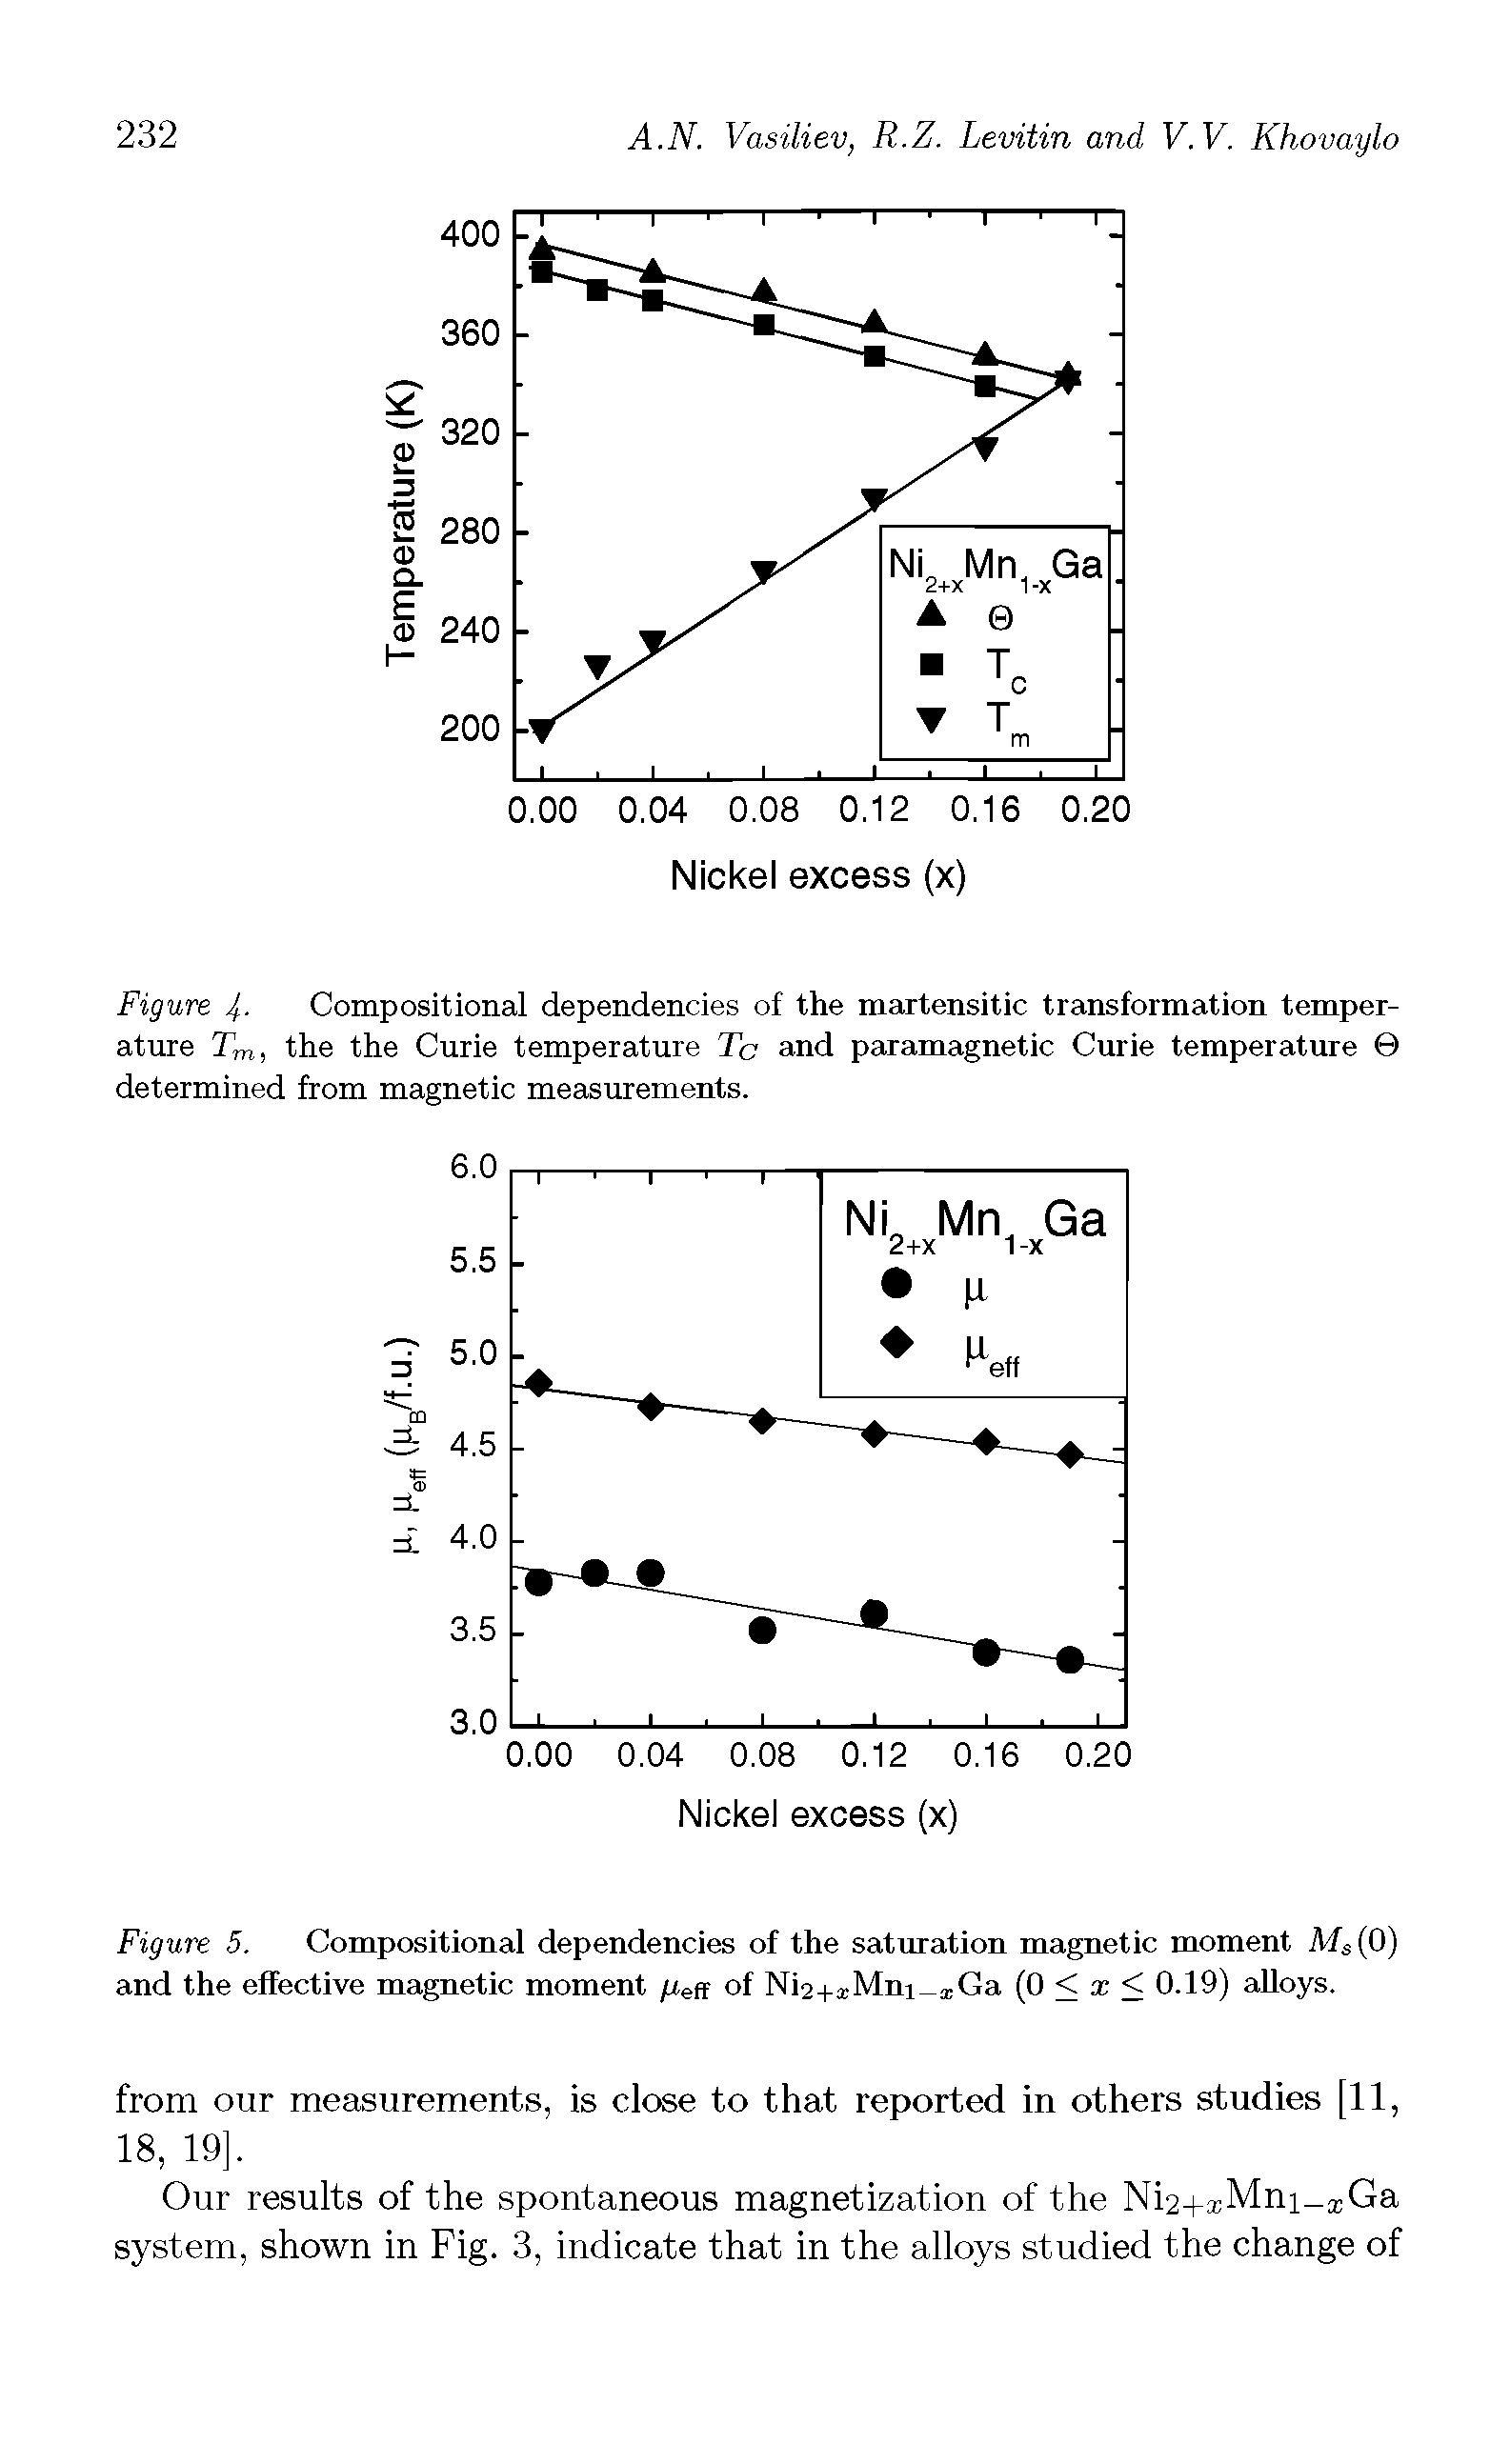 Figure 5. Compositional dependencies of the saturation magnetic moment Ms(0) and the effective magnetic moment peff of Nio+x-Mni tCa (0 < x < 0.19) alloys.